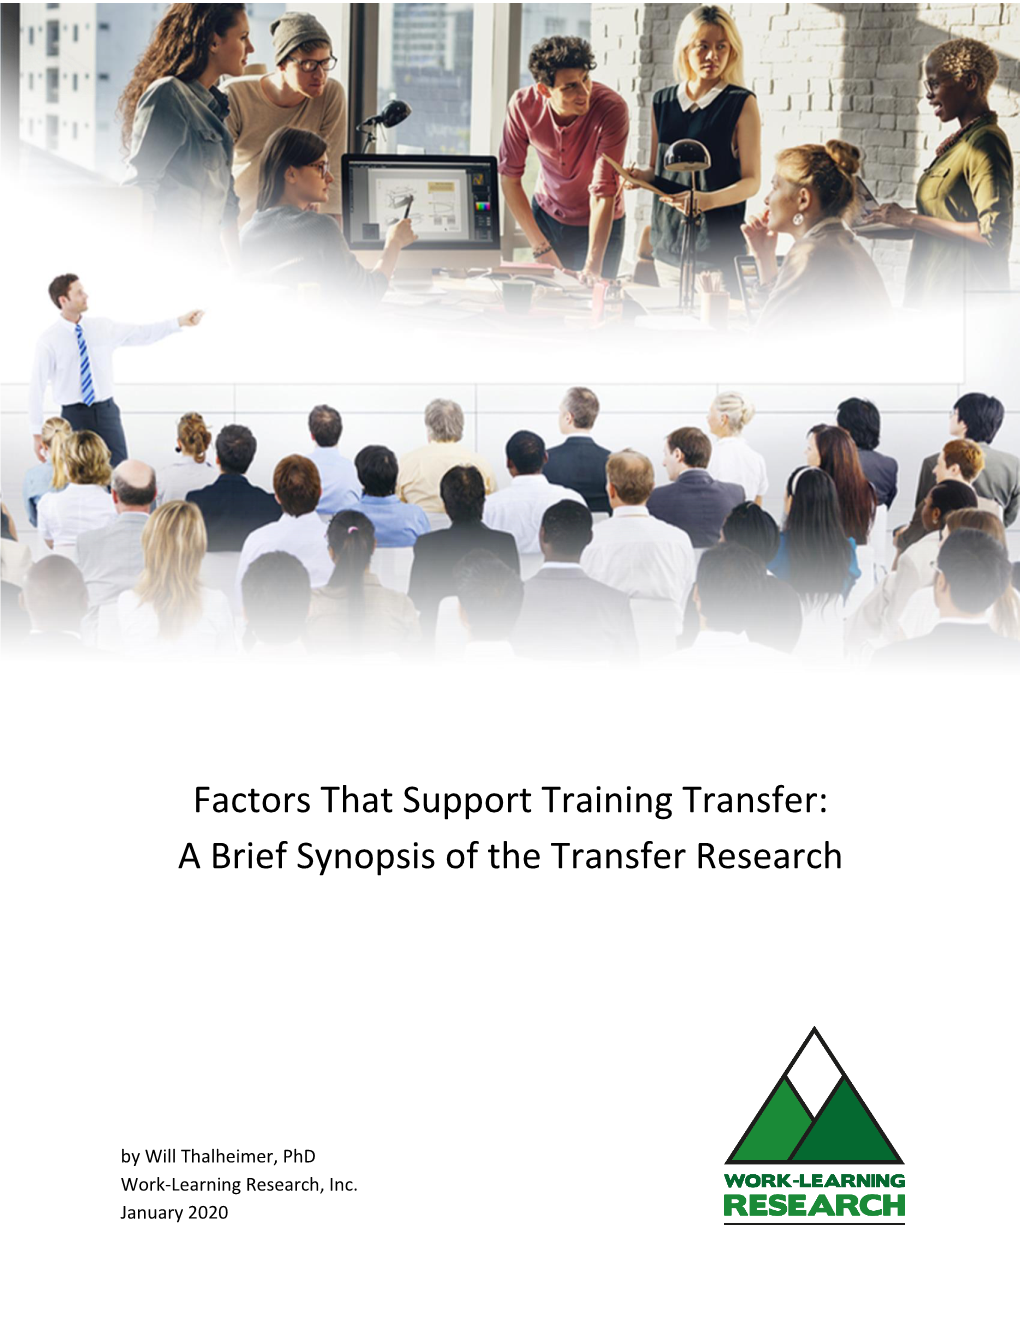 Factors That Support Training Transfer: a Brief Synopsis of the Transfer Research